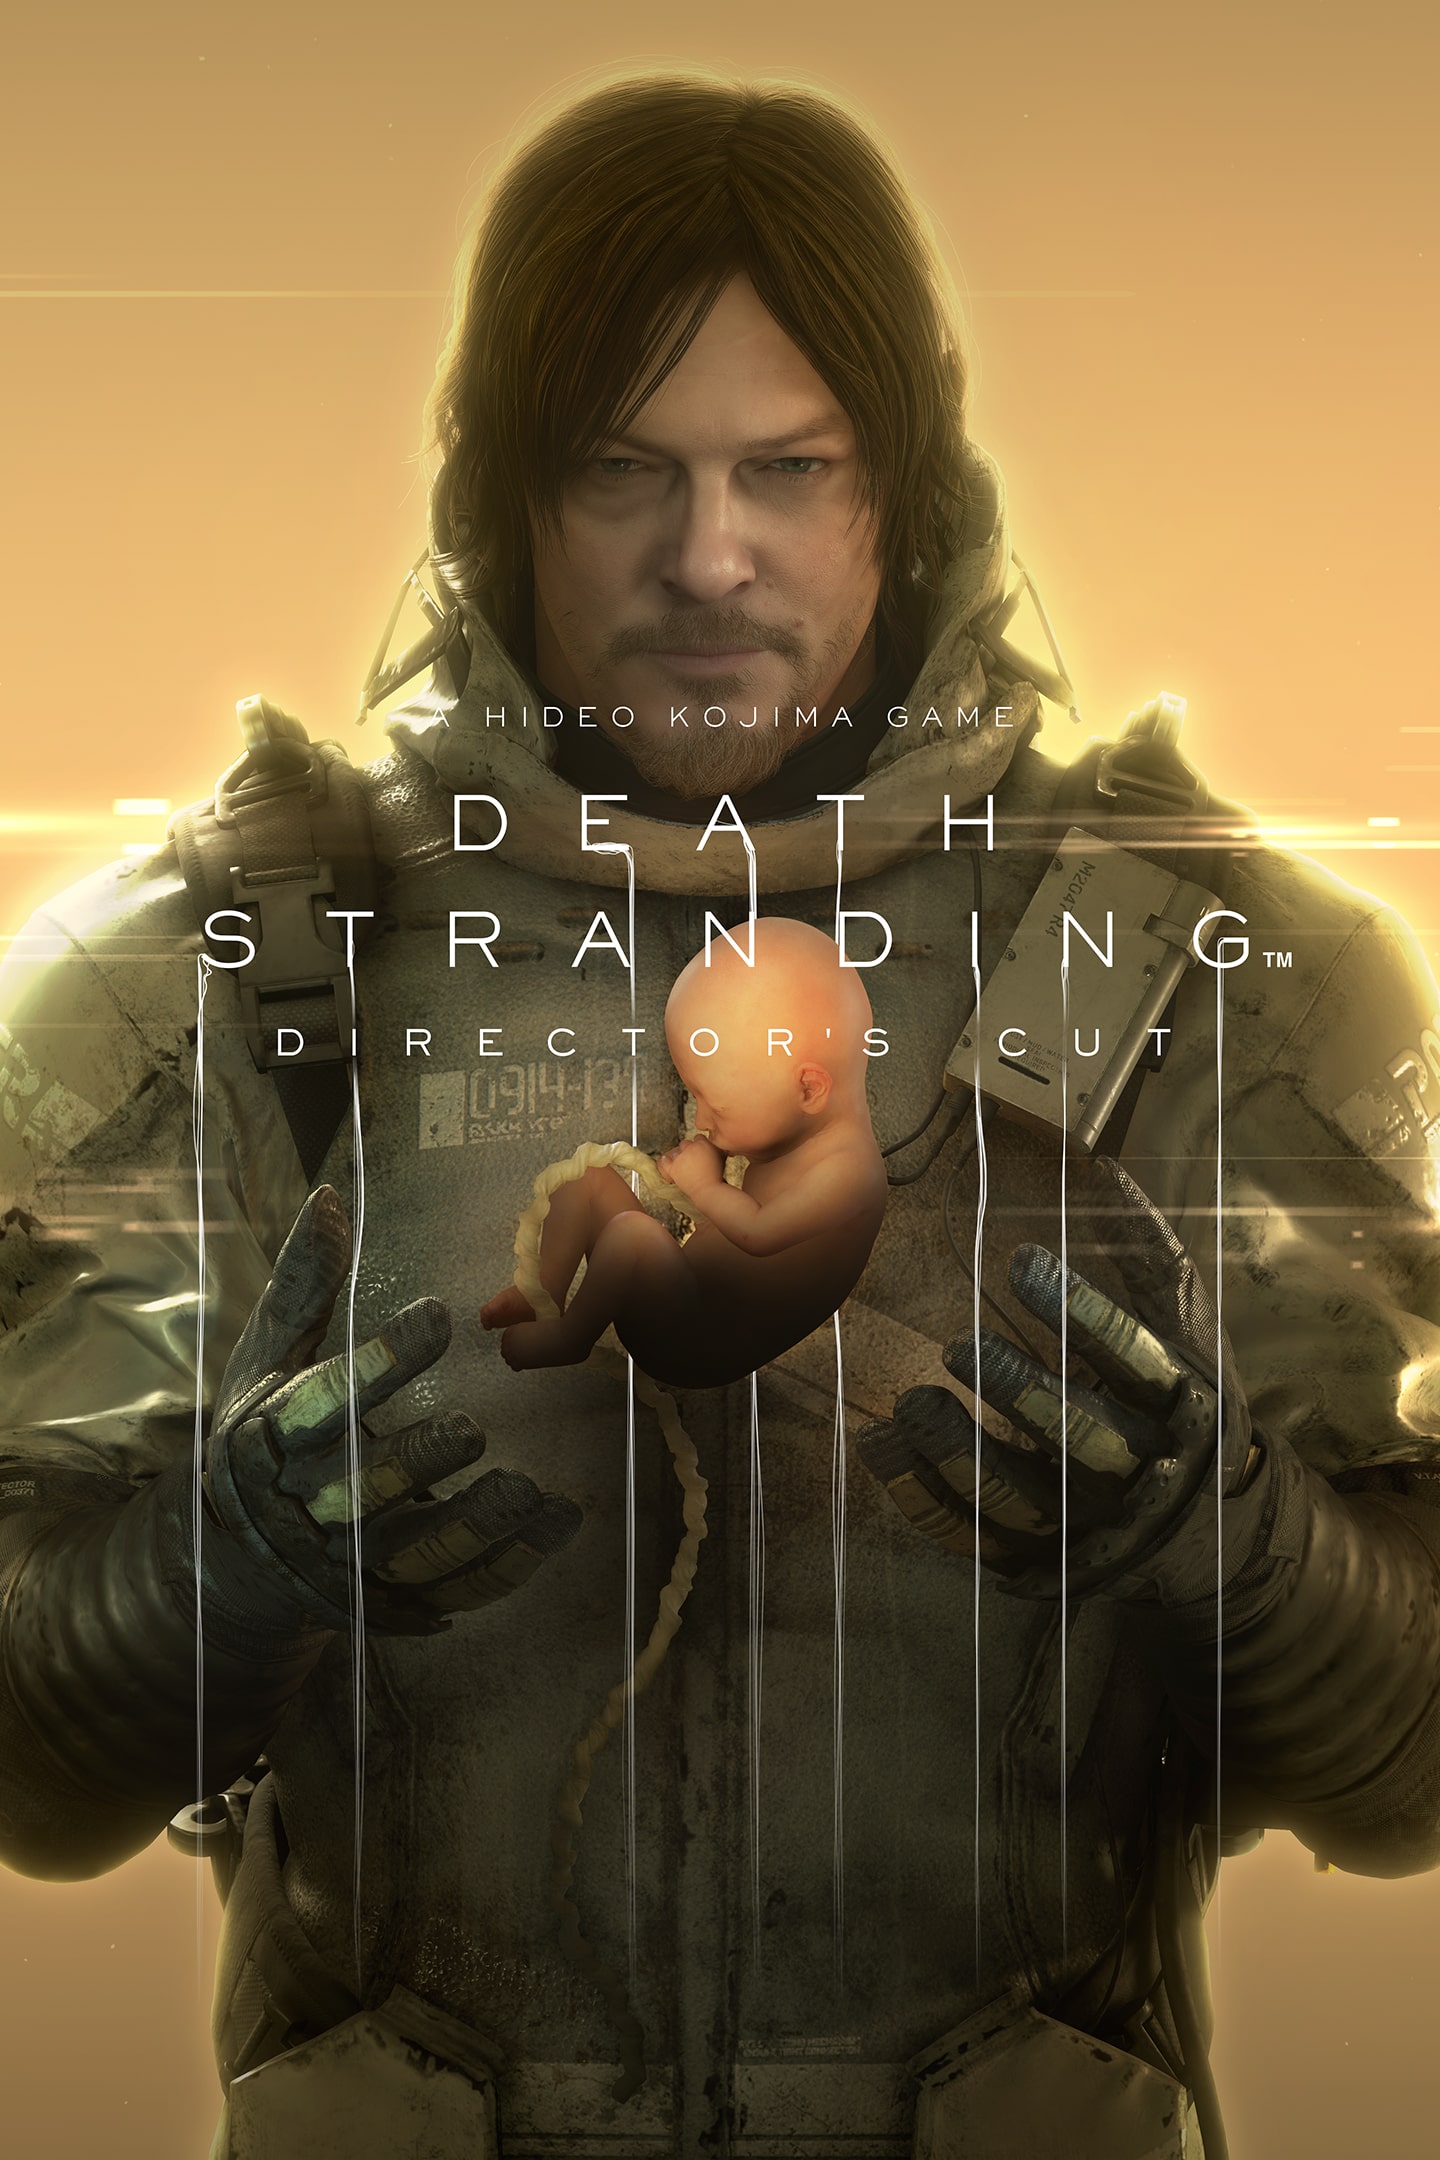 Death Stranding (PS4) cheap - Price of $12.07